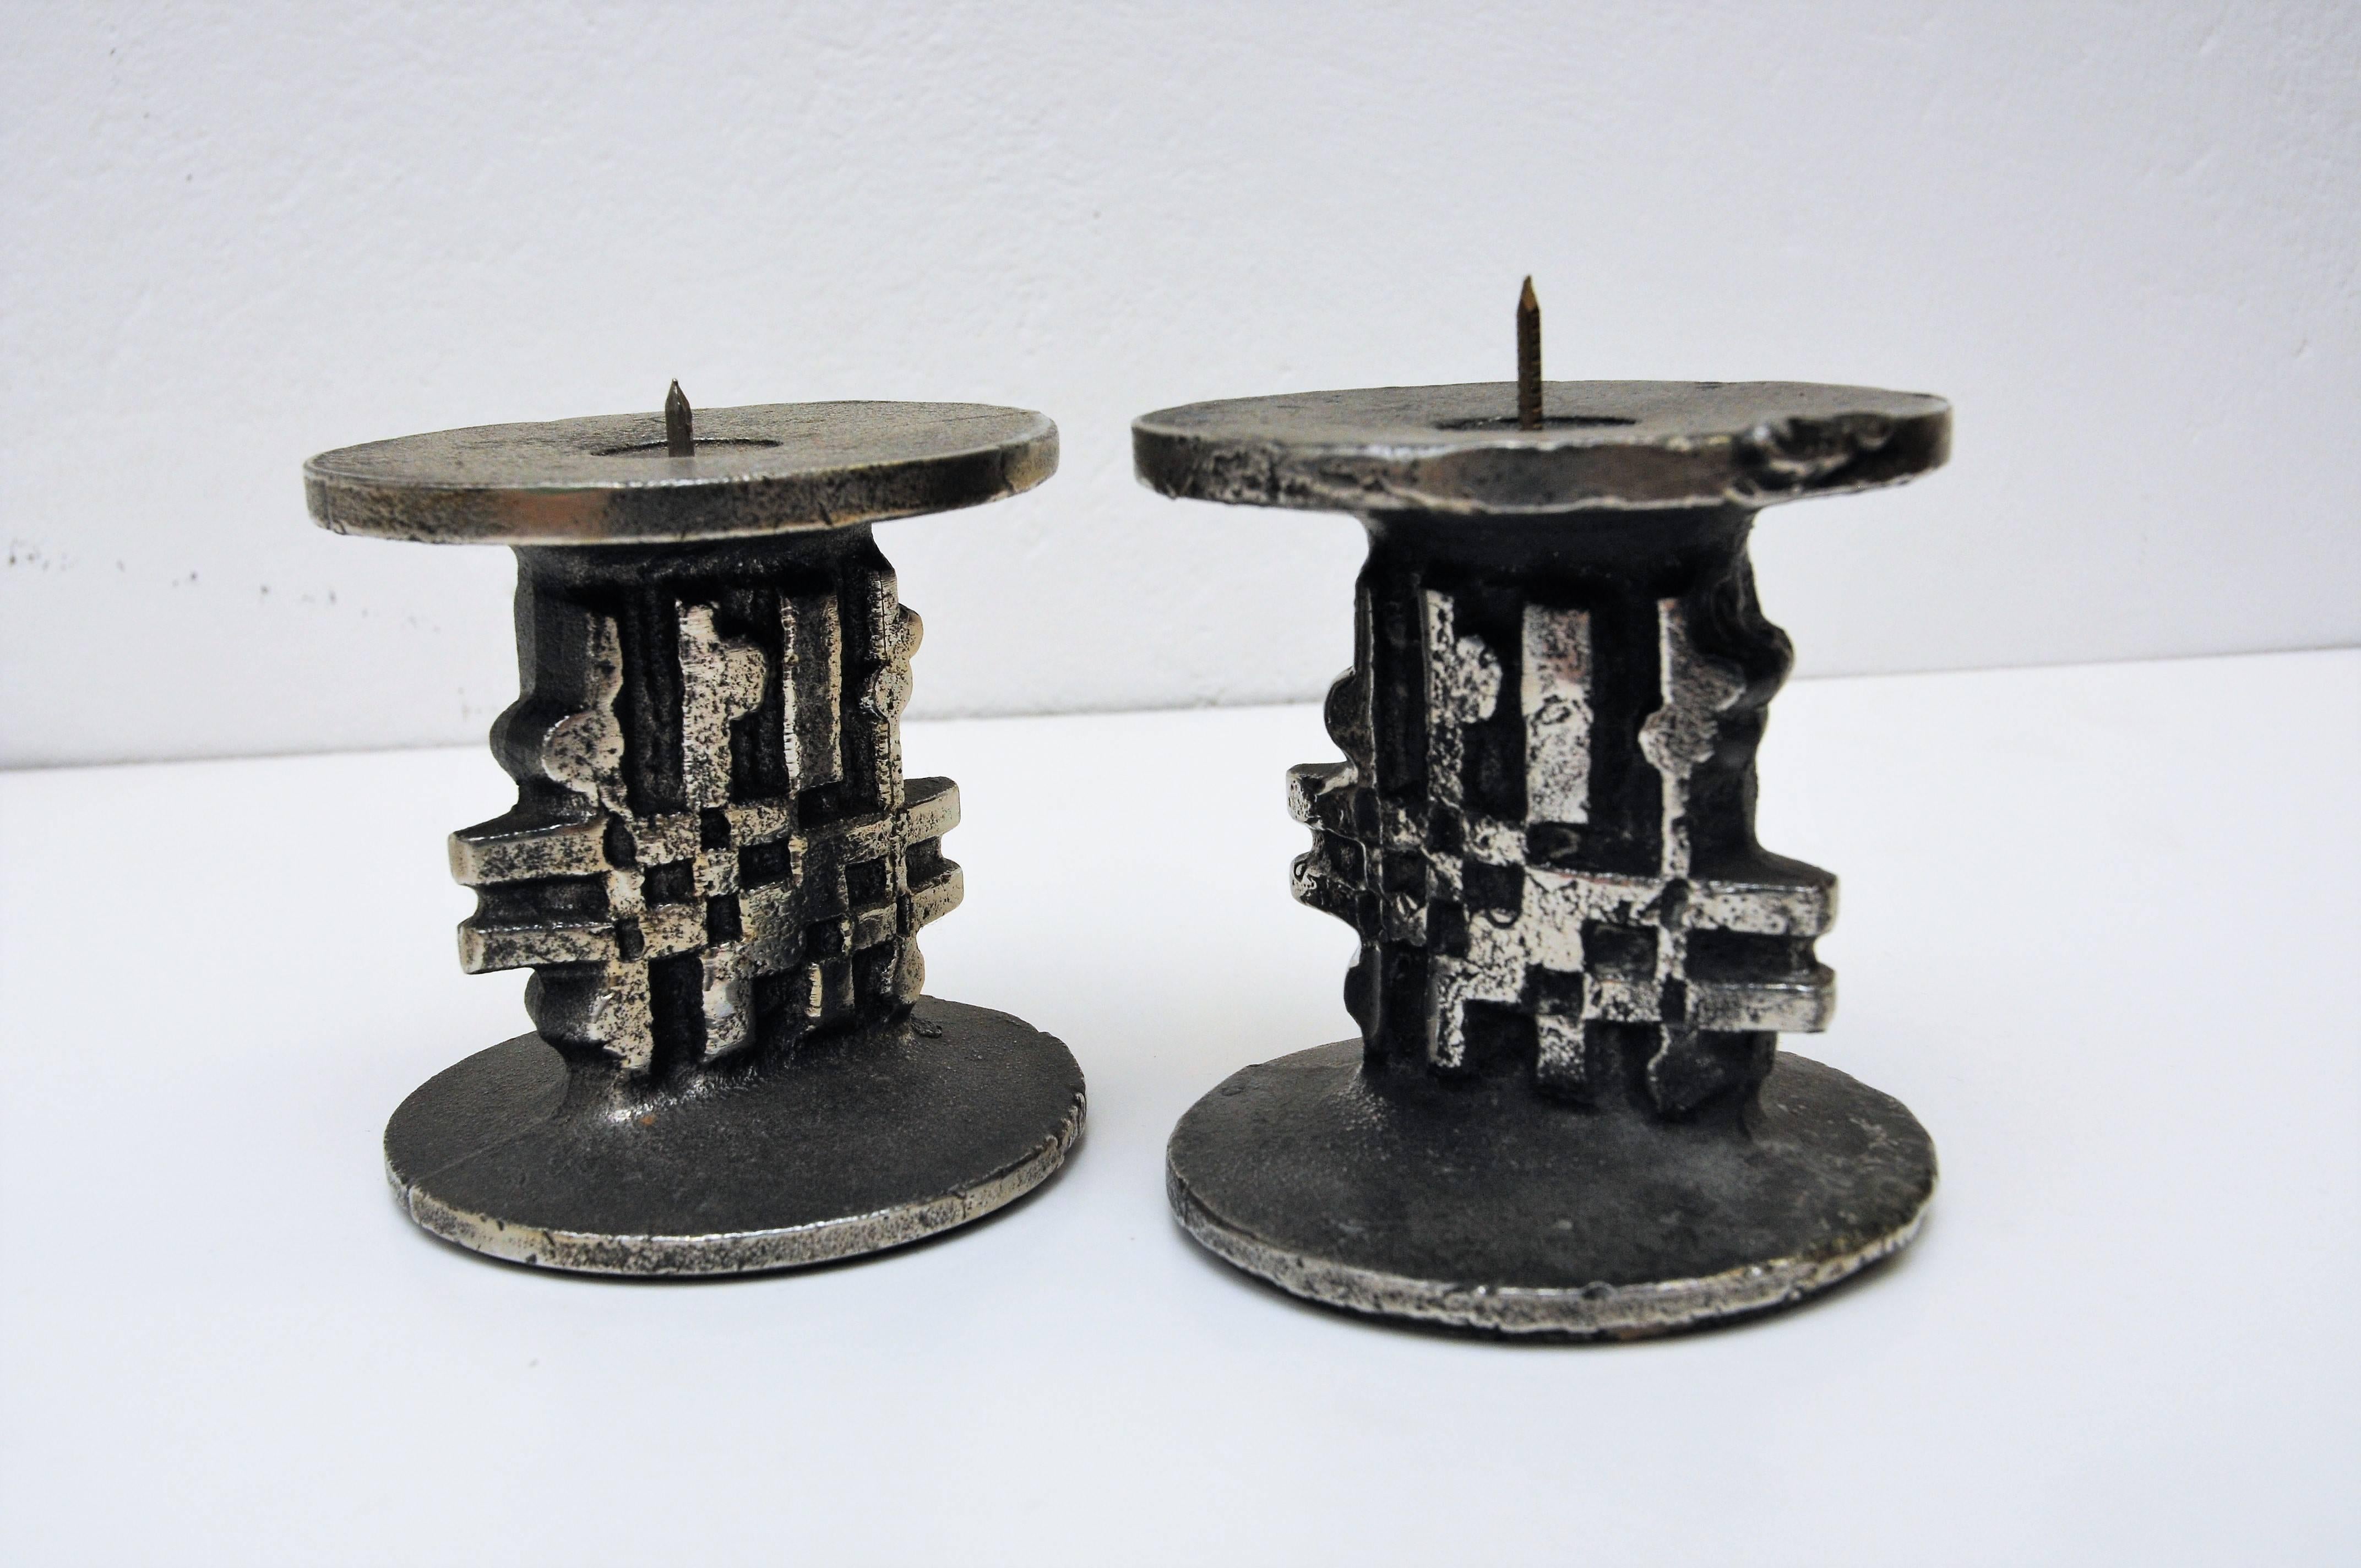 Pair of stainless steel candleholders designed by Olav Joa (born 1942) for Polaris, Sandnes from the 1970s. From the steel art series. Scandinavian design, Norway.
Olav Joa worked for Figgjo as a designer and product development manager since 1983.